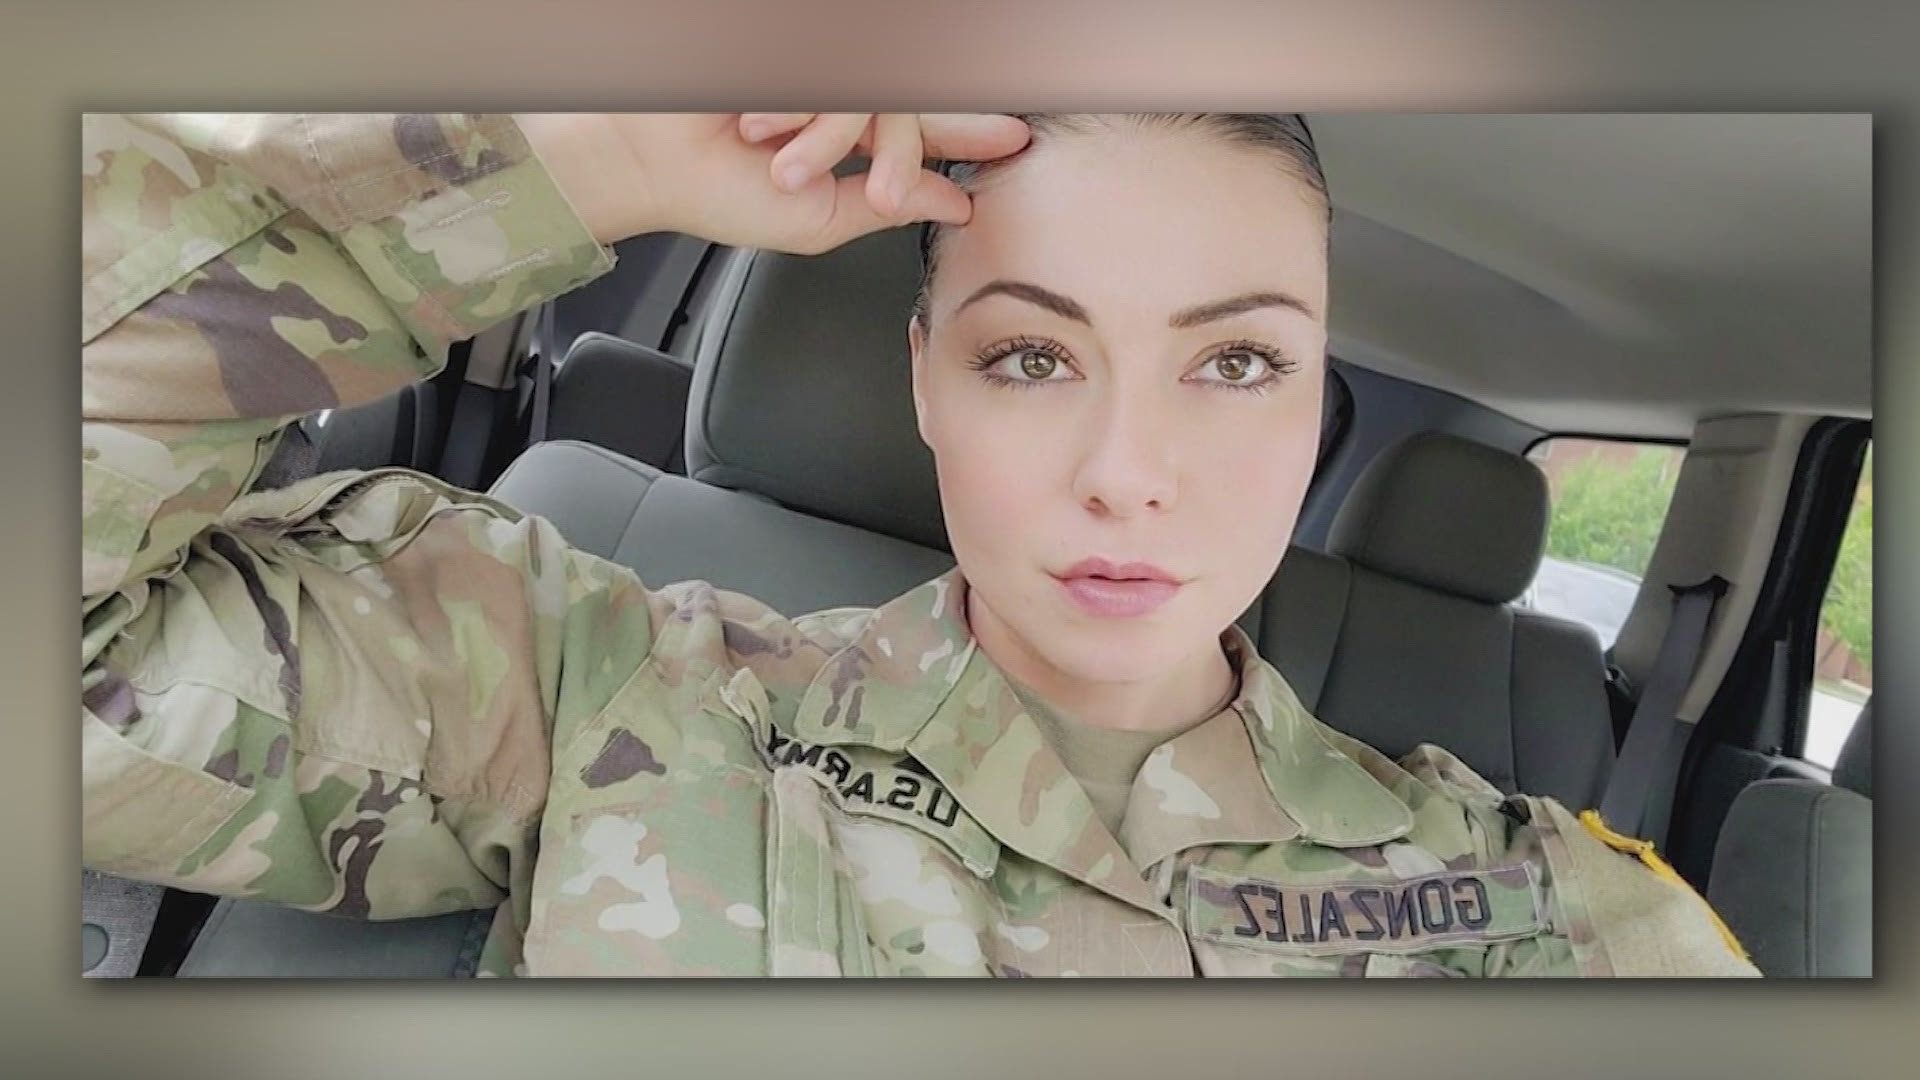 Iowa native in U.S. Army alleges sexual assault, harassment from superiors